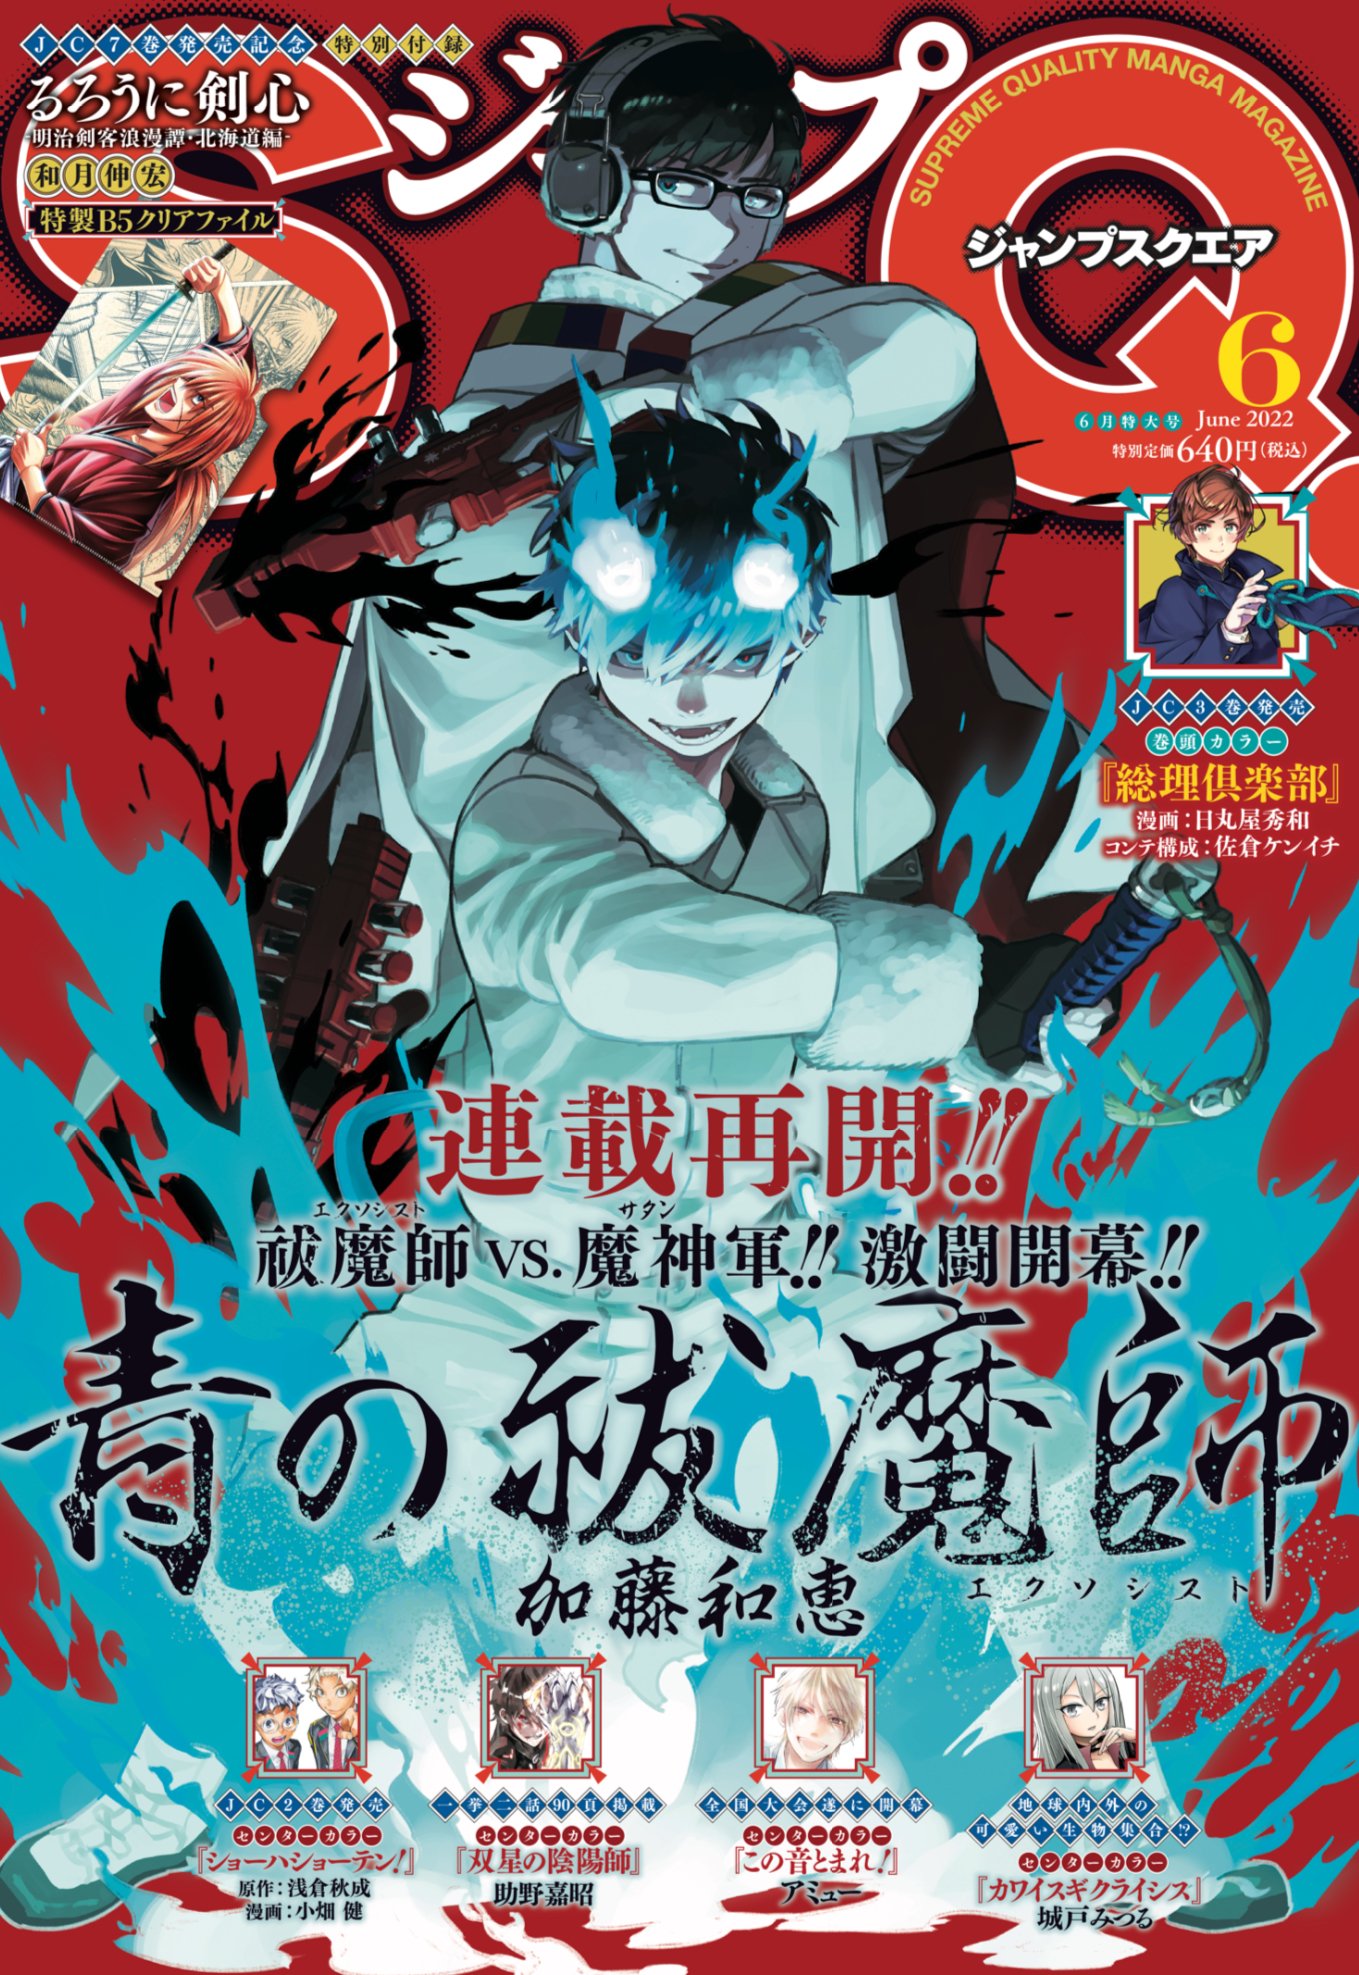 Jump SQ cover with Blue Exorcist